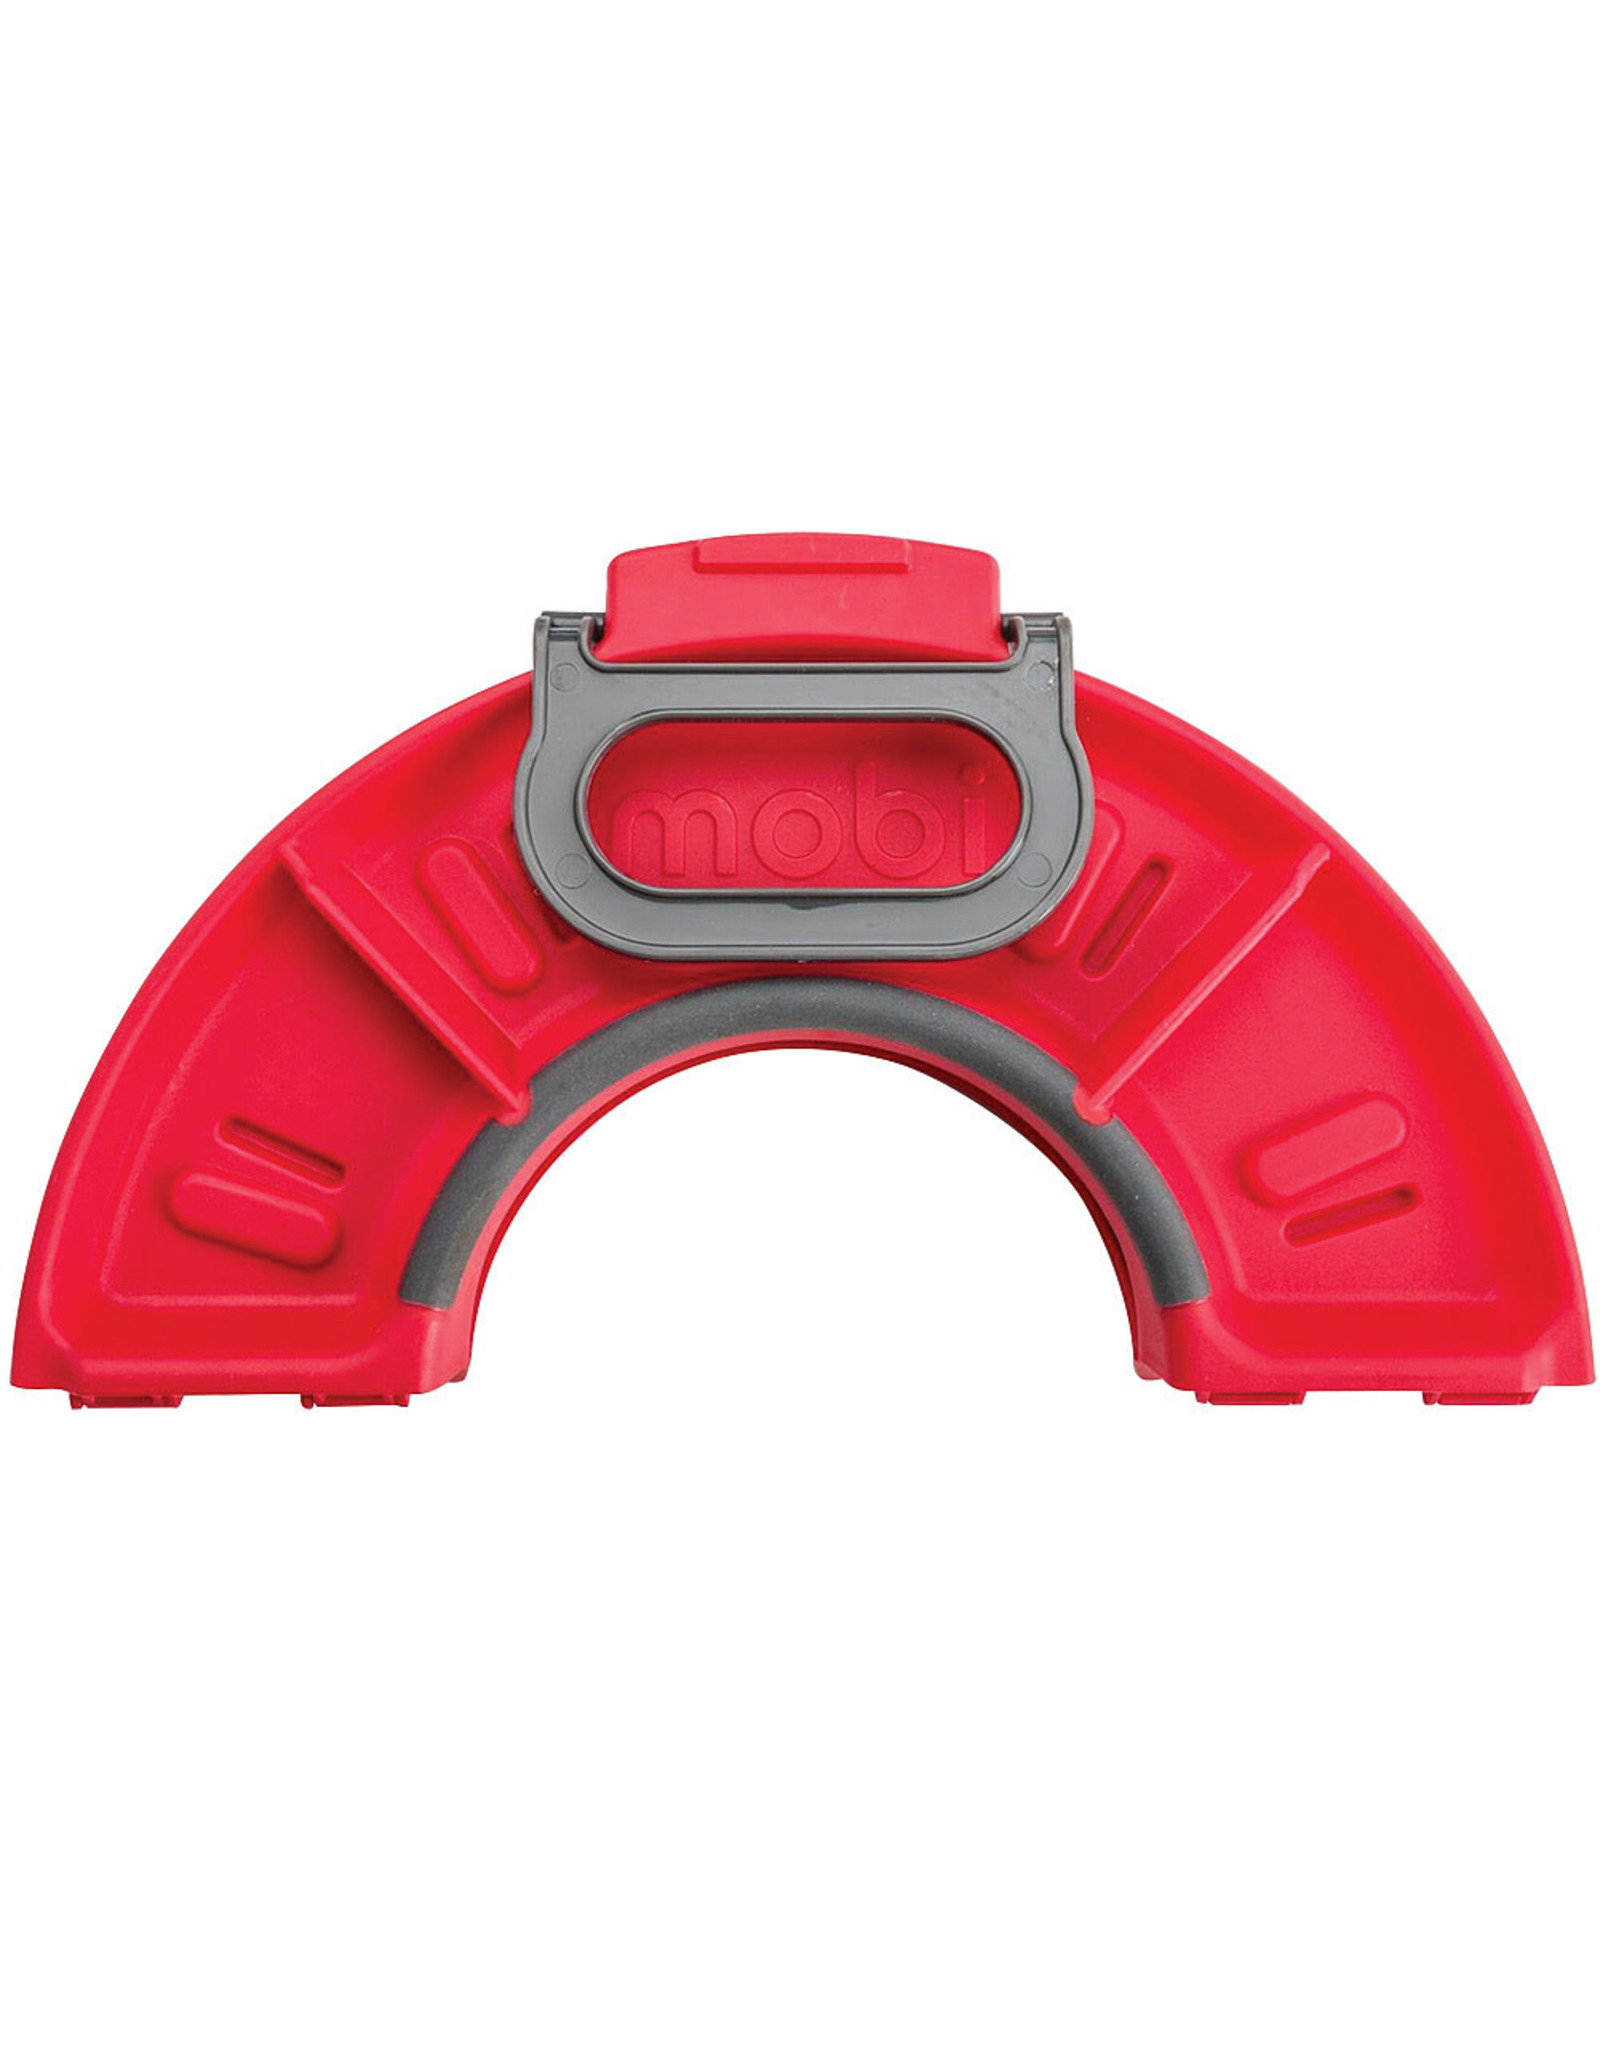 Folding Microwave Tray - Red